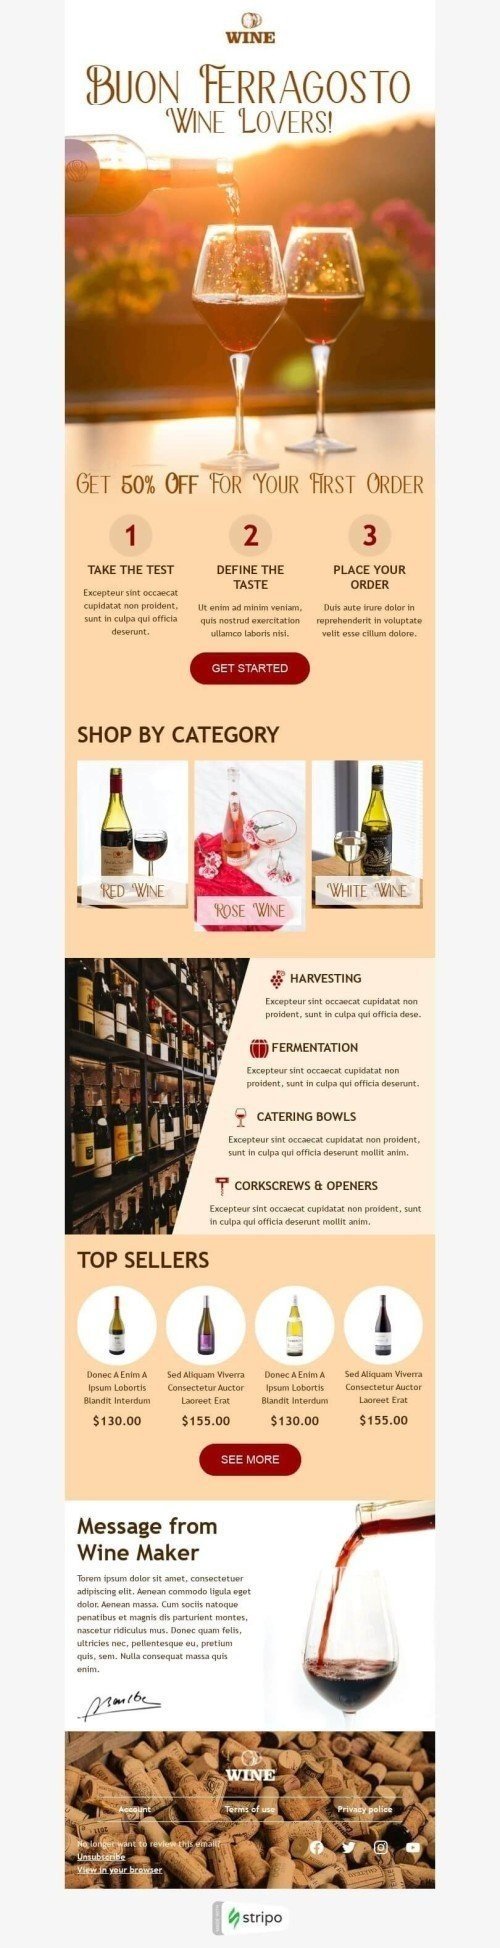 Ferragosto Email Template «Message from Wine Maker» for Beverages industry mobile view